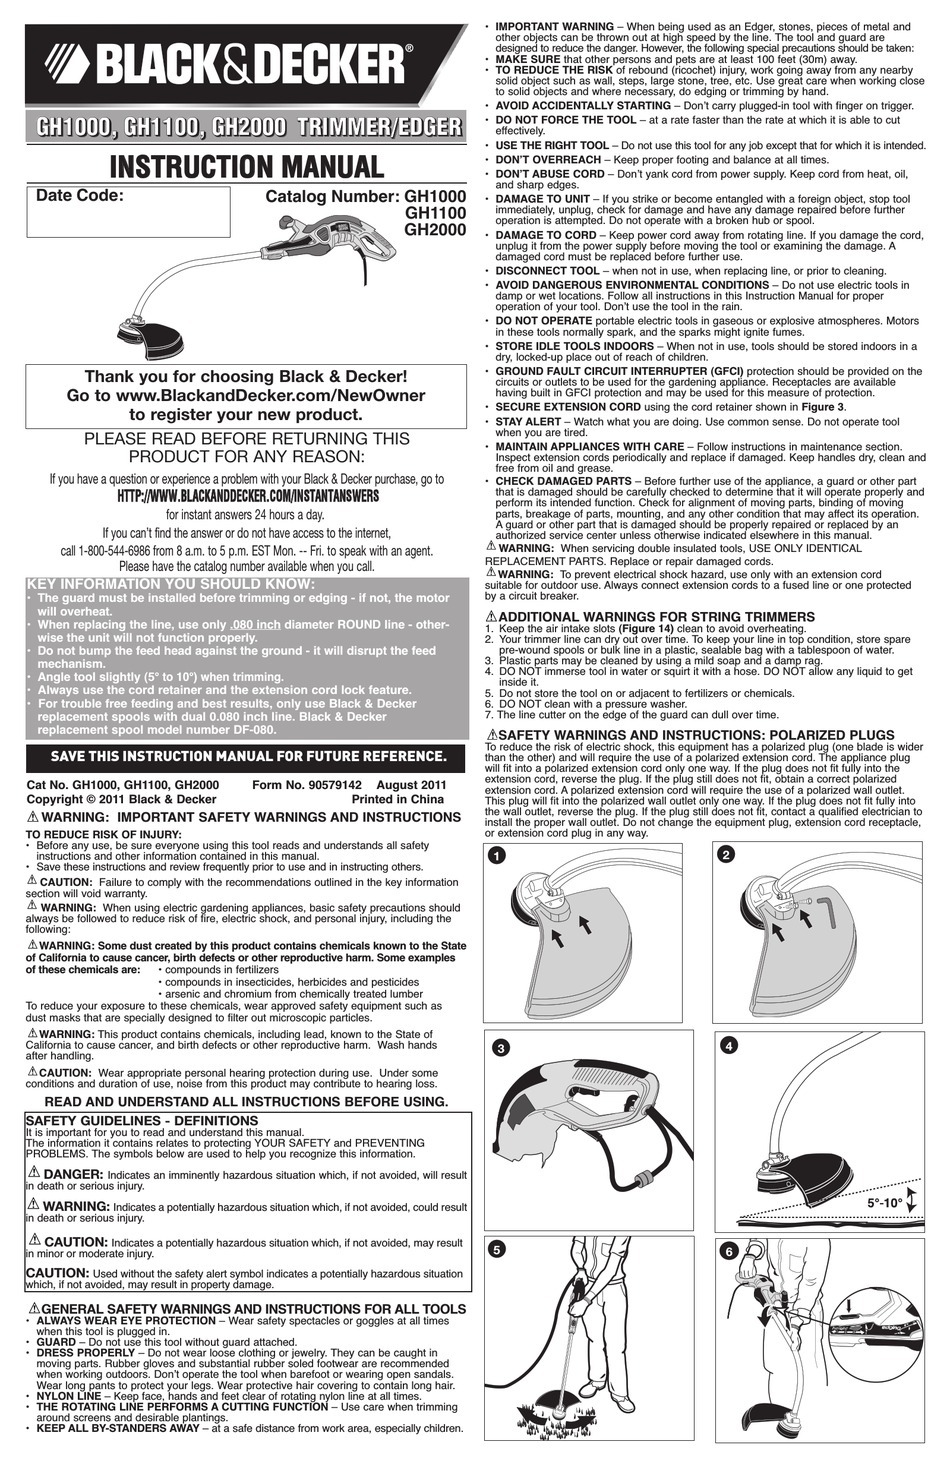 Replacement Accessories - Black & Decker GH710 Instruction Manual [Page 9]